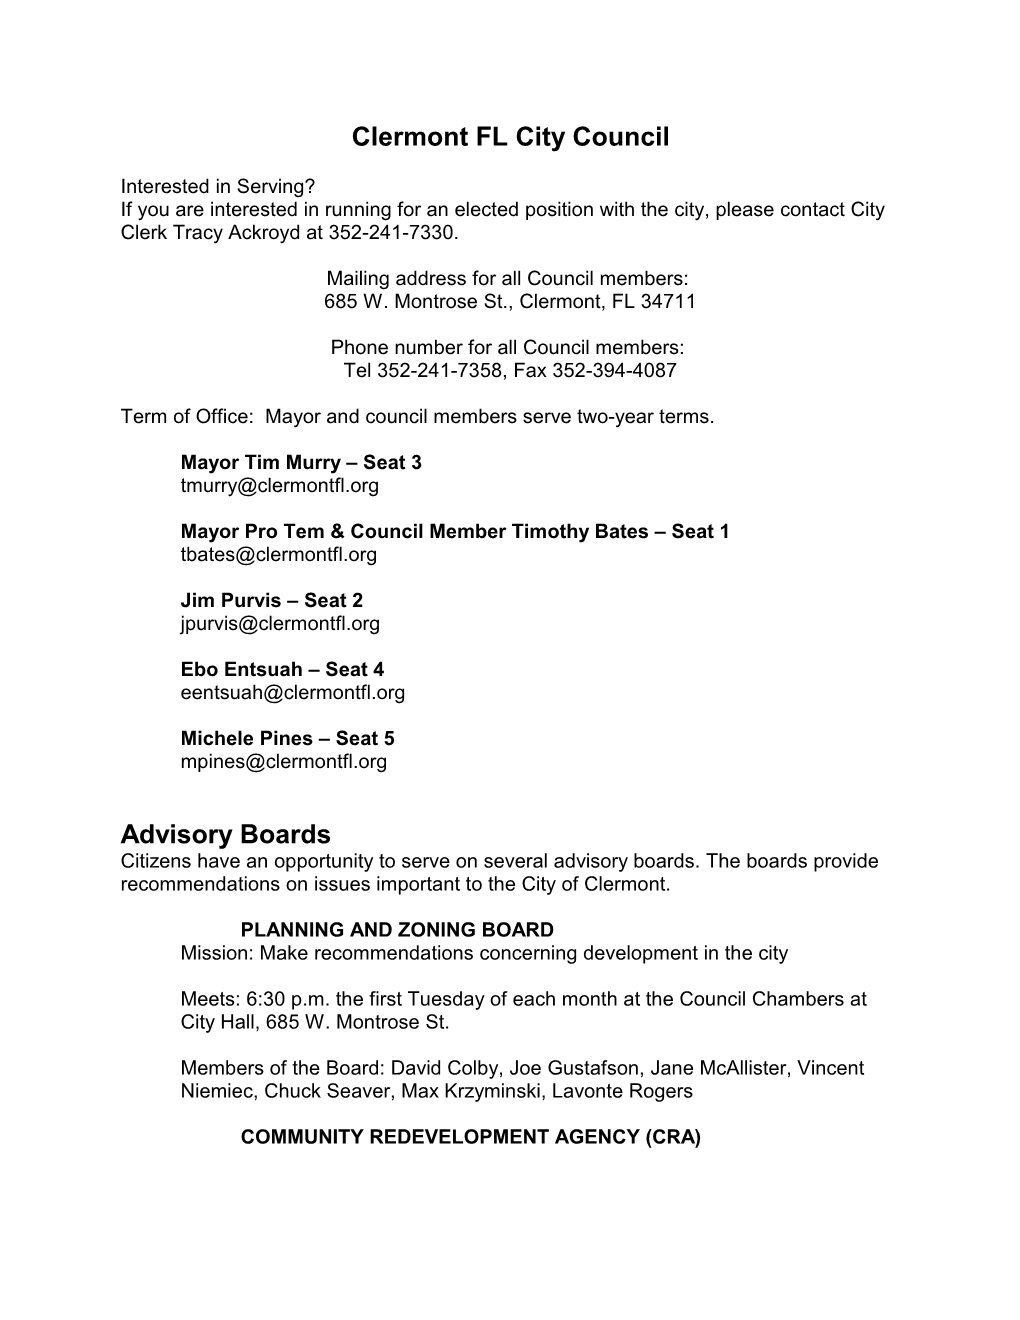 Clermont FL City Council Advisory Boards